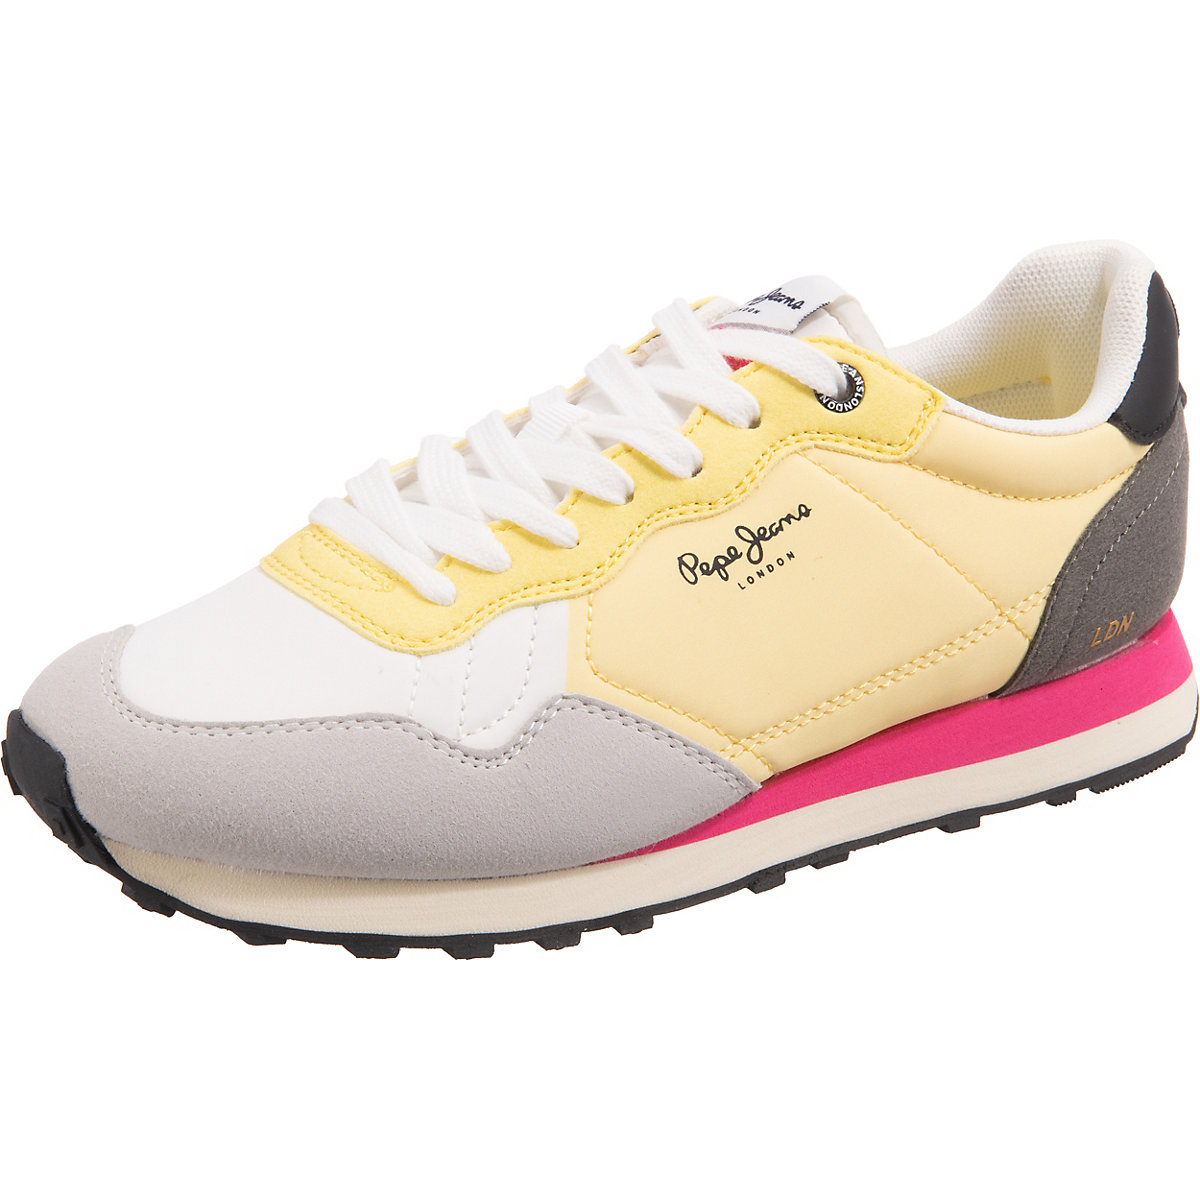 Pepe Jeans Natch W Sneakers Low mehrfarbig